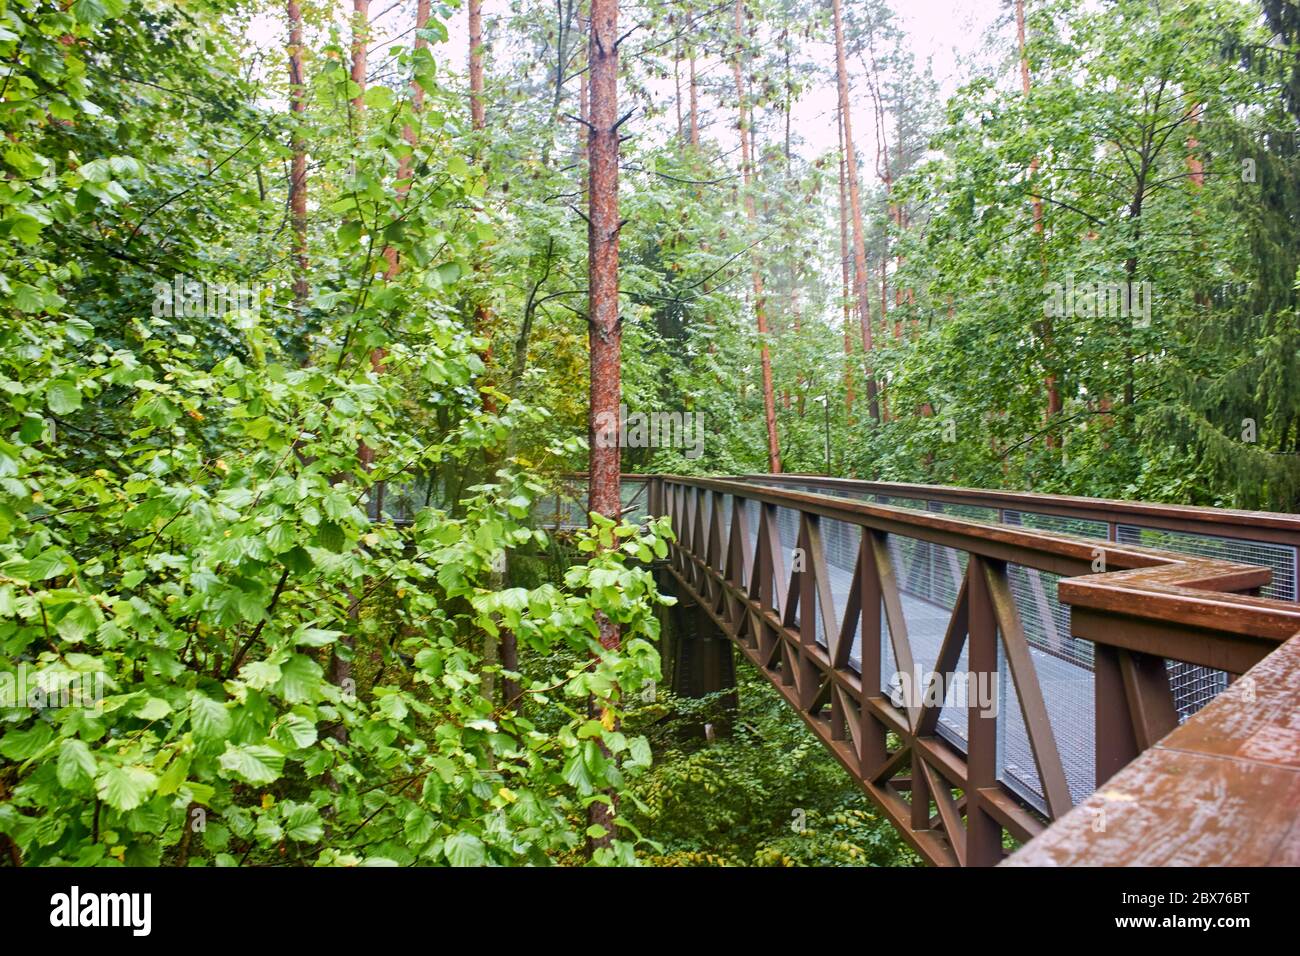 Wooden bridge in the forest to see tree tops Stock Photo